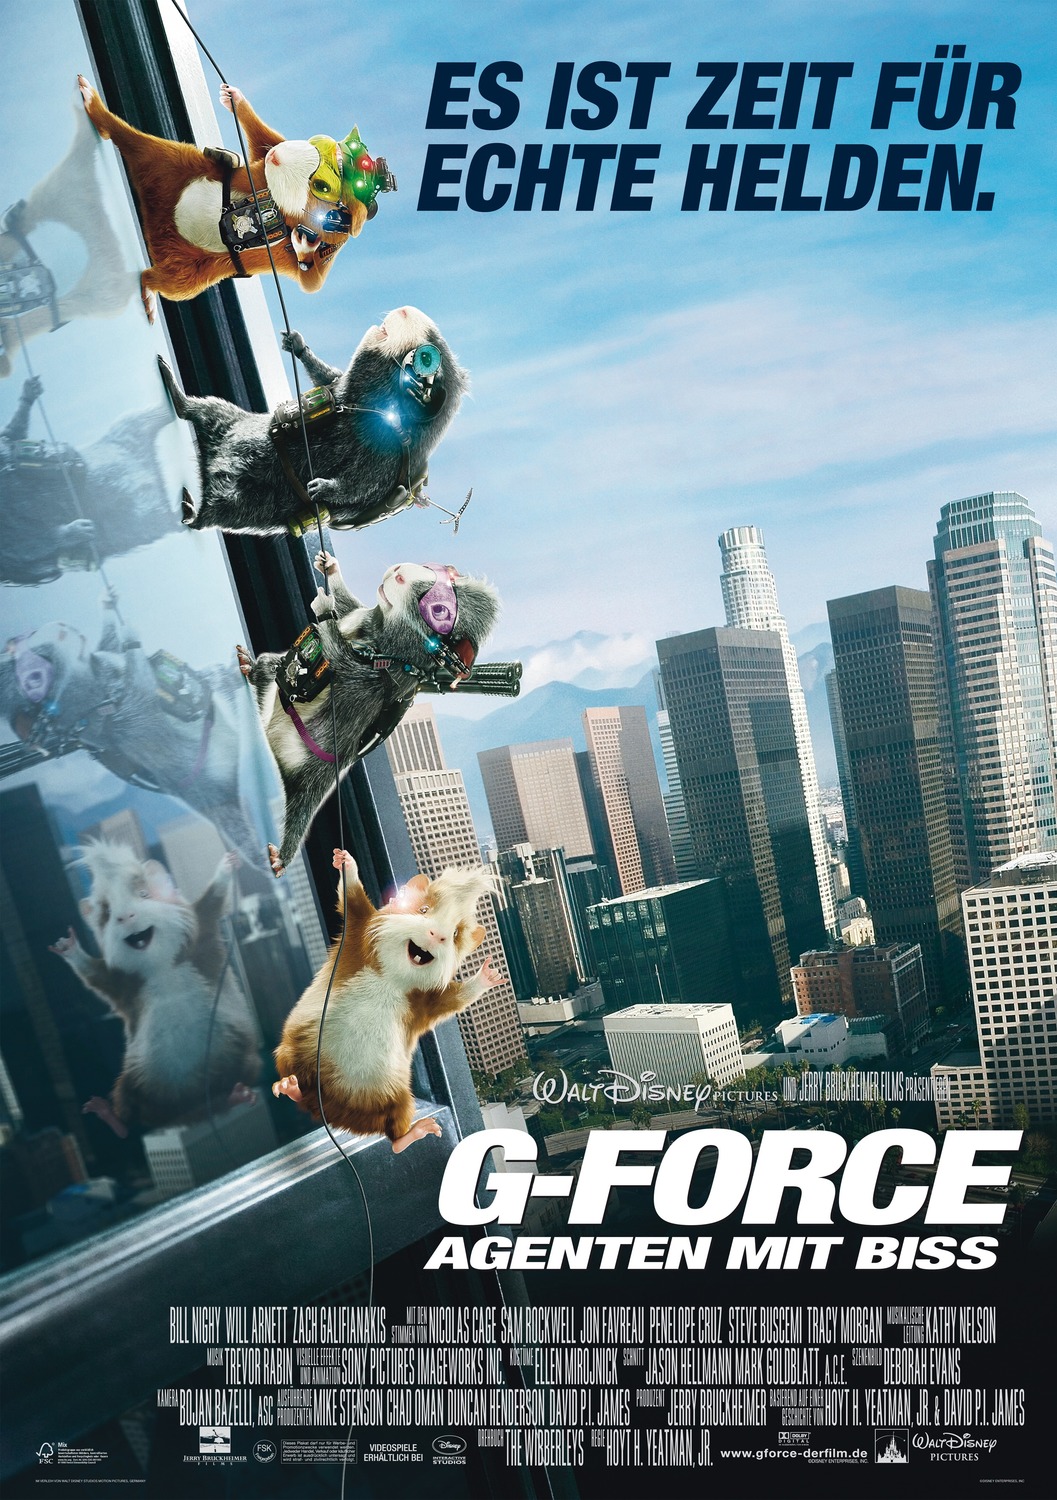 Extra Large Movie Poster Image for G-Force (#6 of 11)